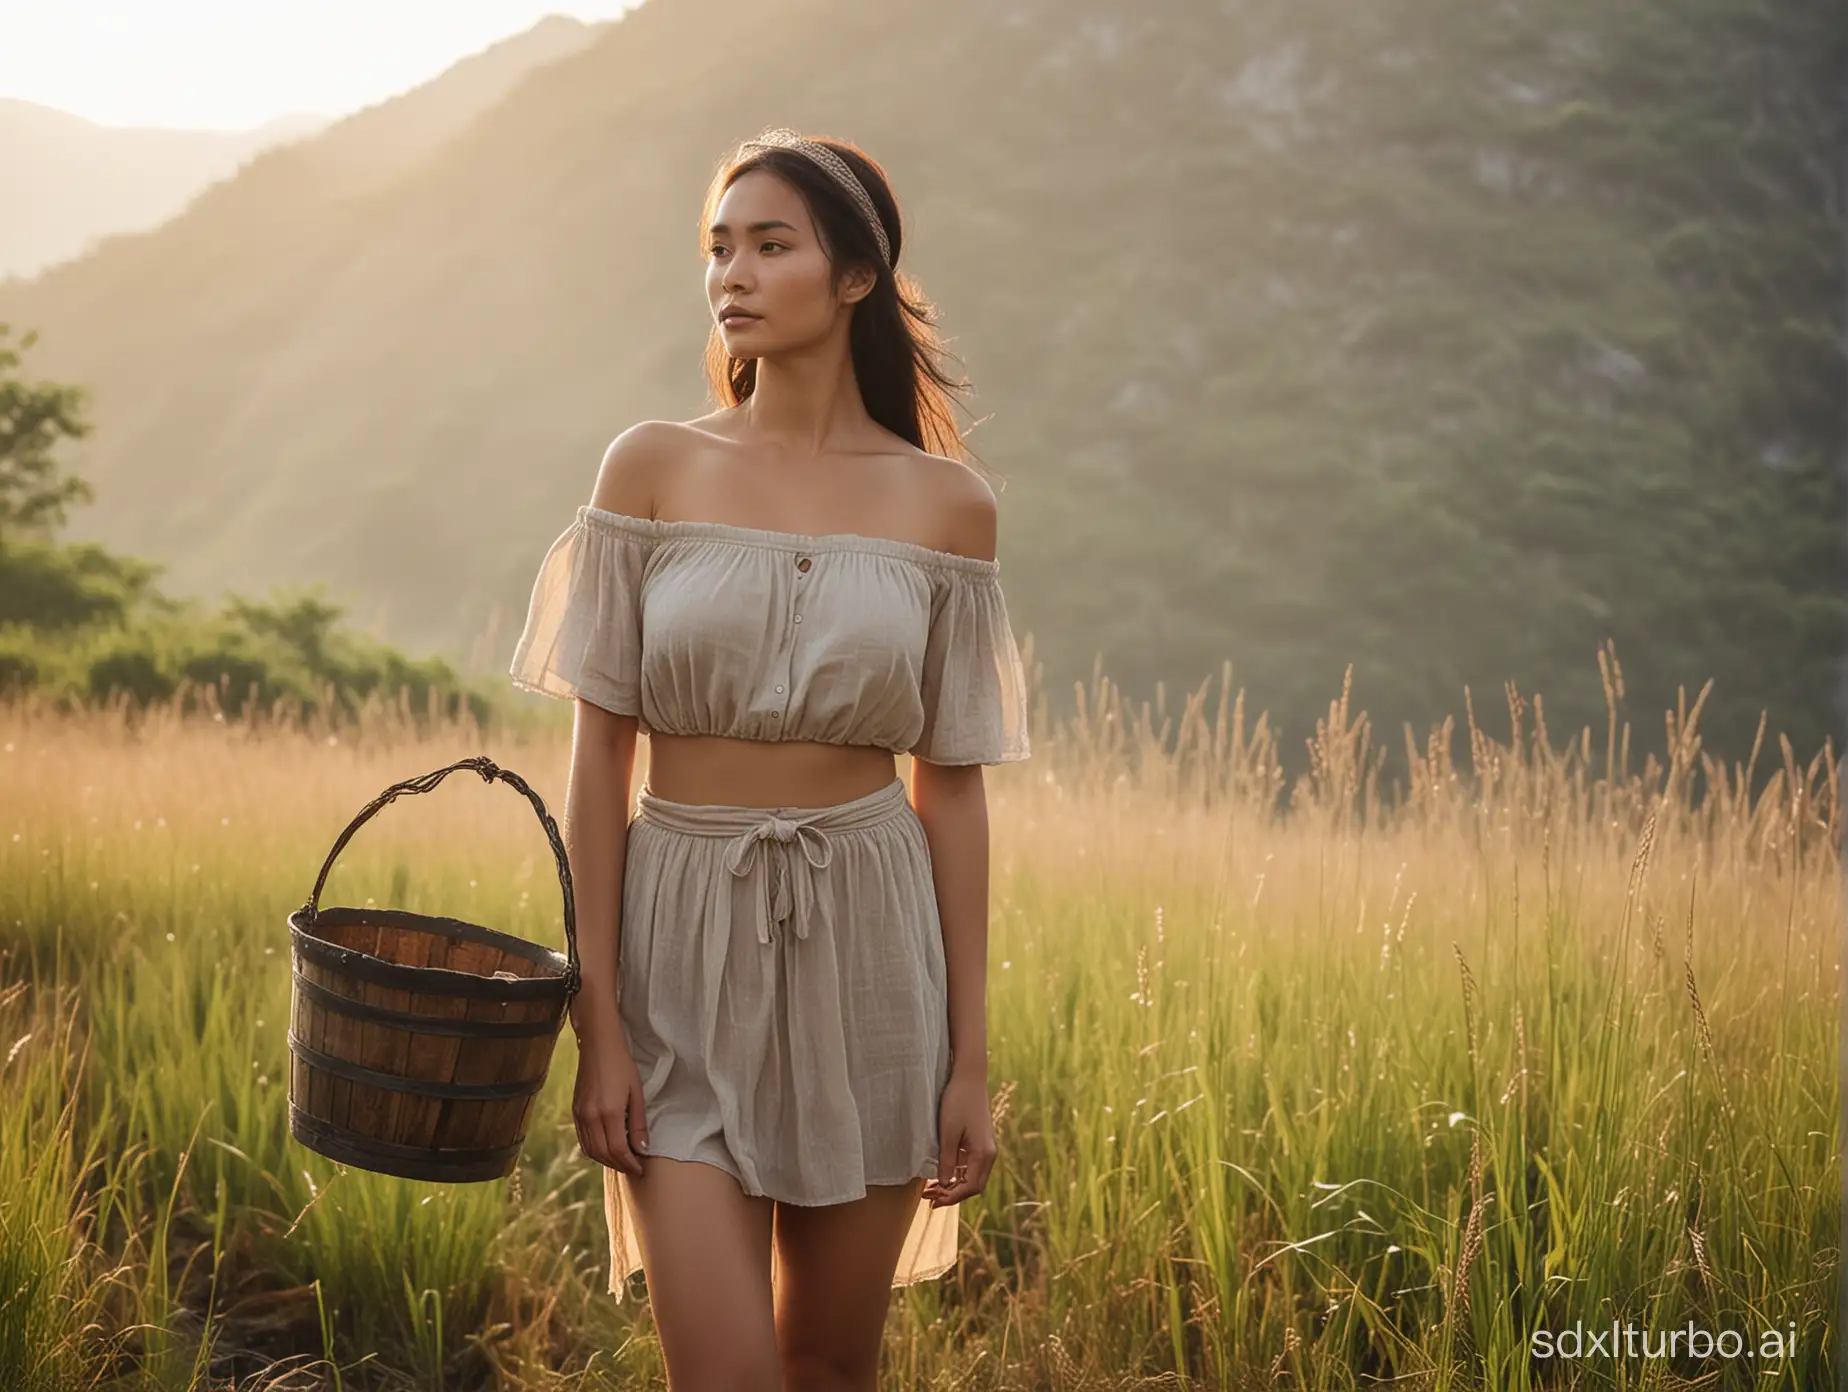 40 years old Filipina lady in high grass holding wooden bucket. Hilltop in morning mist. Sunrise, sun rays. Wearing unbuttoned cropped loincloth shirt, revealing. Profusely sweating, wet clothes. Headband. Medieval time. Film grain, soft lighting. Bokeh. Fat Legs. Freckled skin. Small, flat breasts. Hair tied. Contour of volcano in background. Full body from side. Erected nipples. Naked hips. Deep V cut. Seducing face. Inviting pose. 